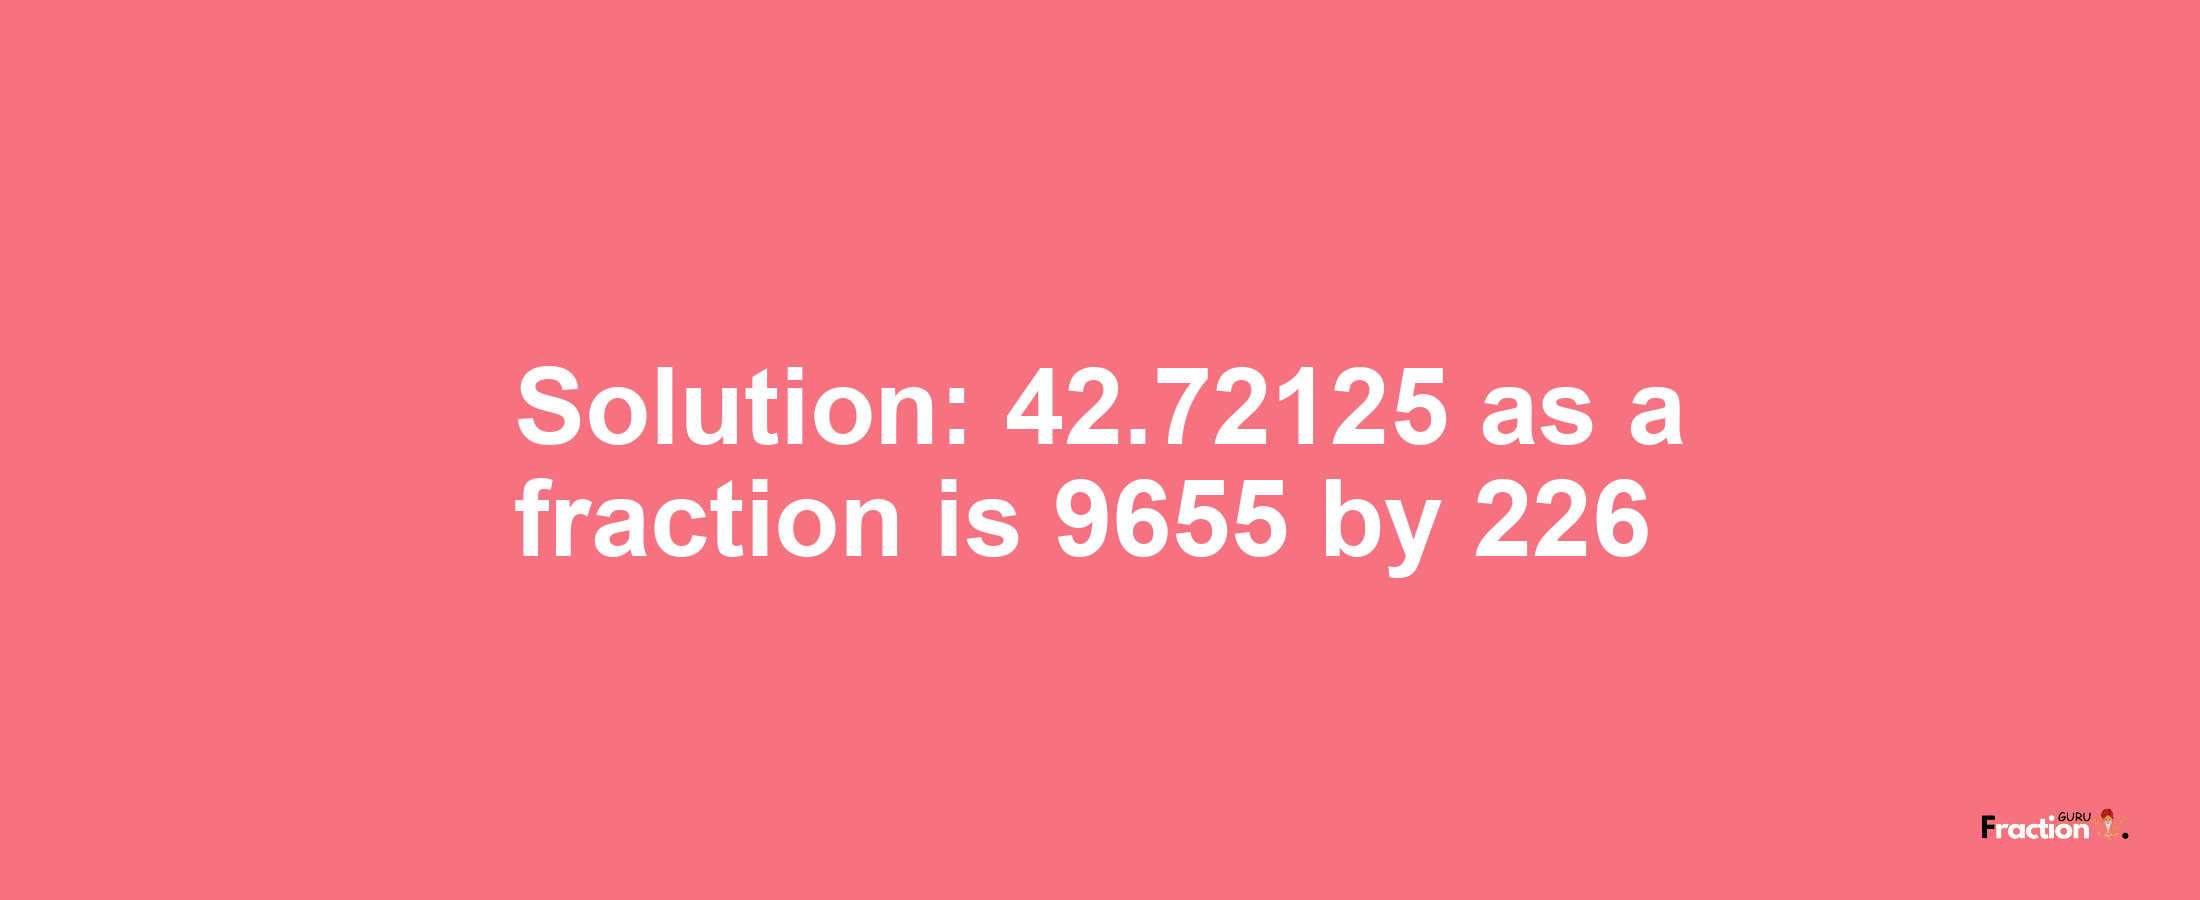 Solution:42.72125 as a fraction is 9655/226